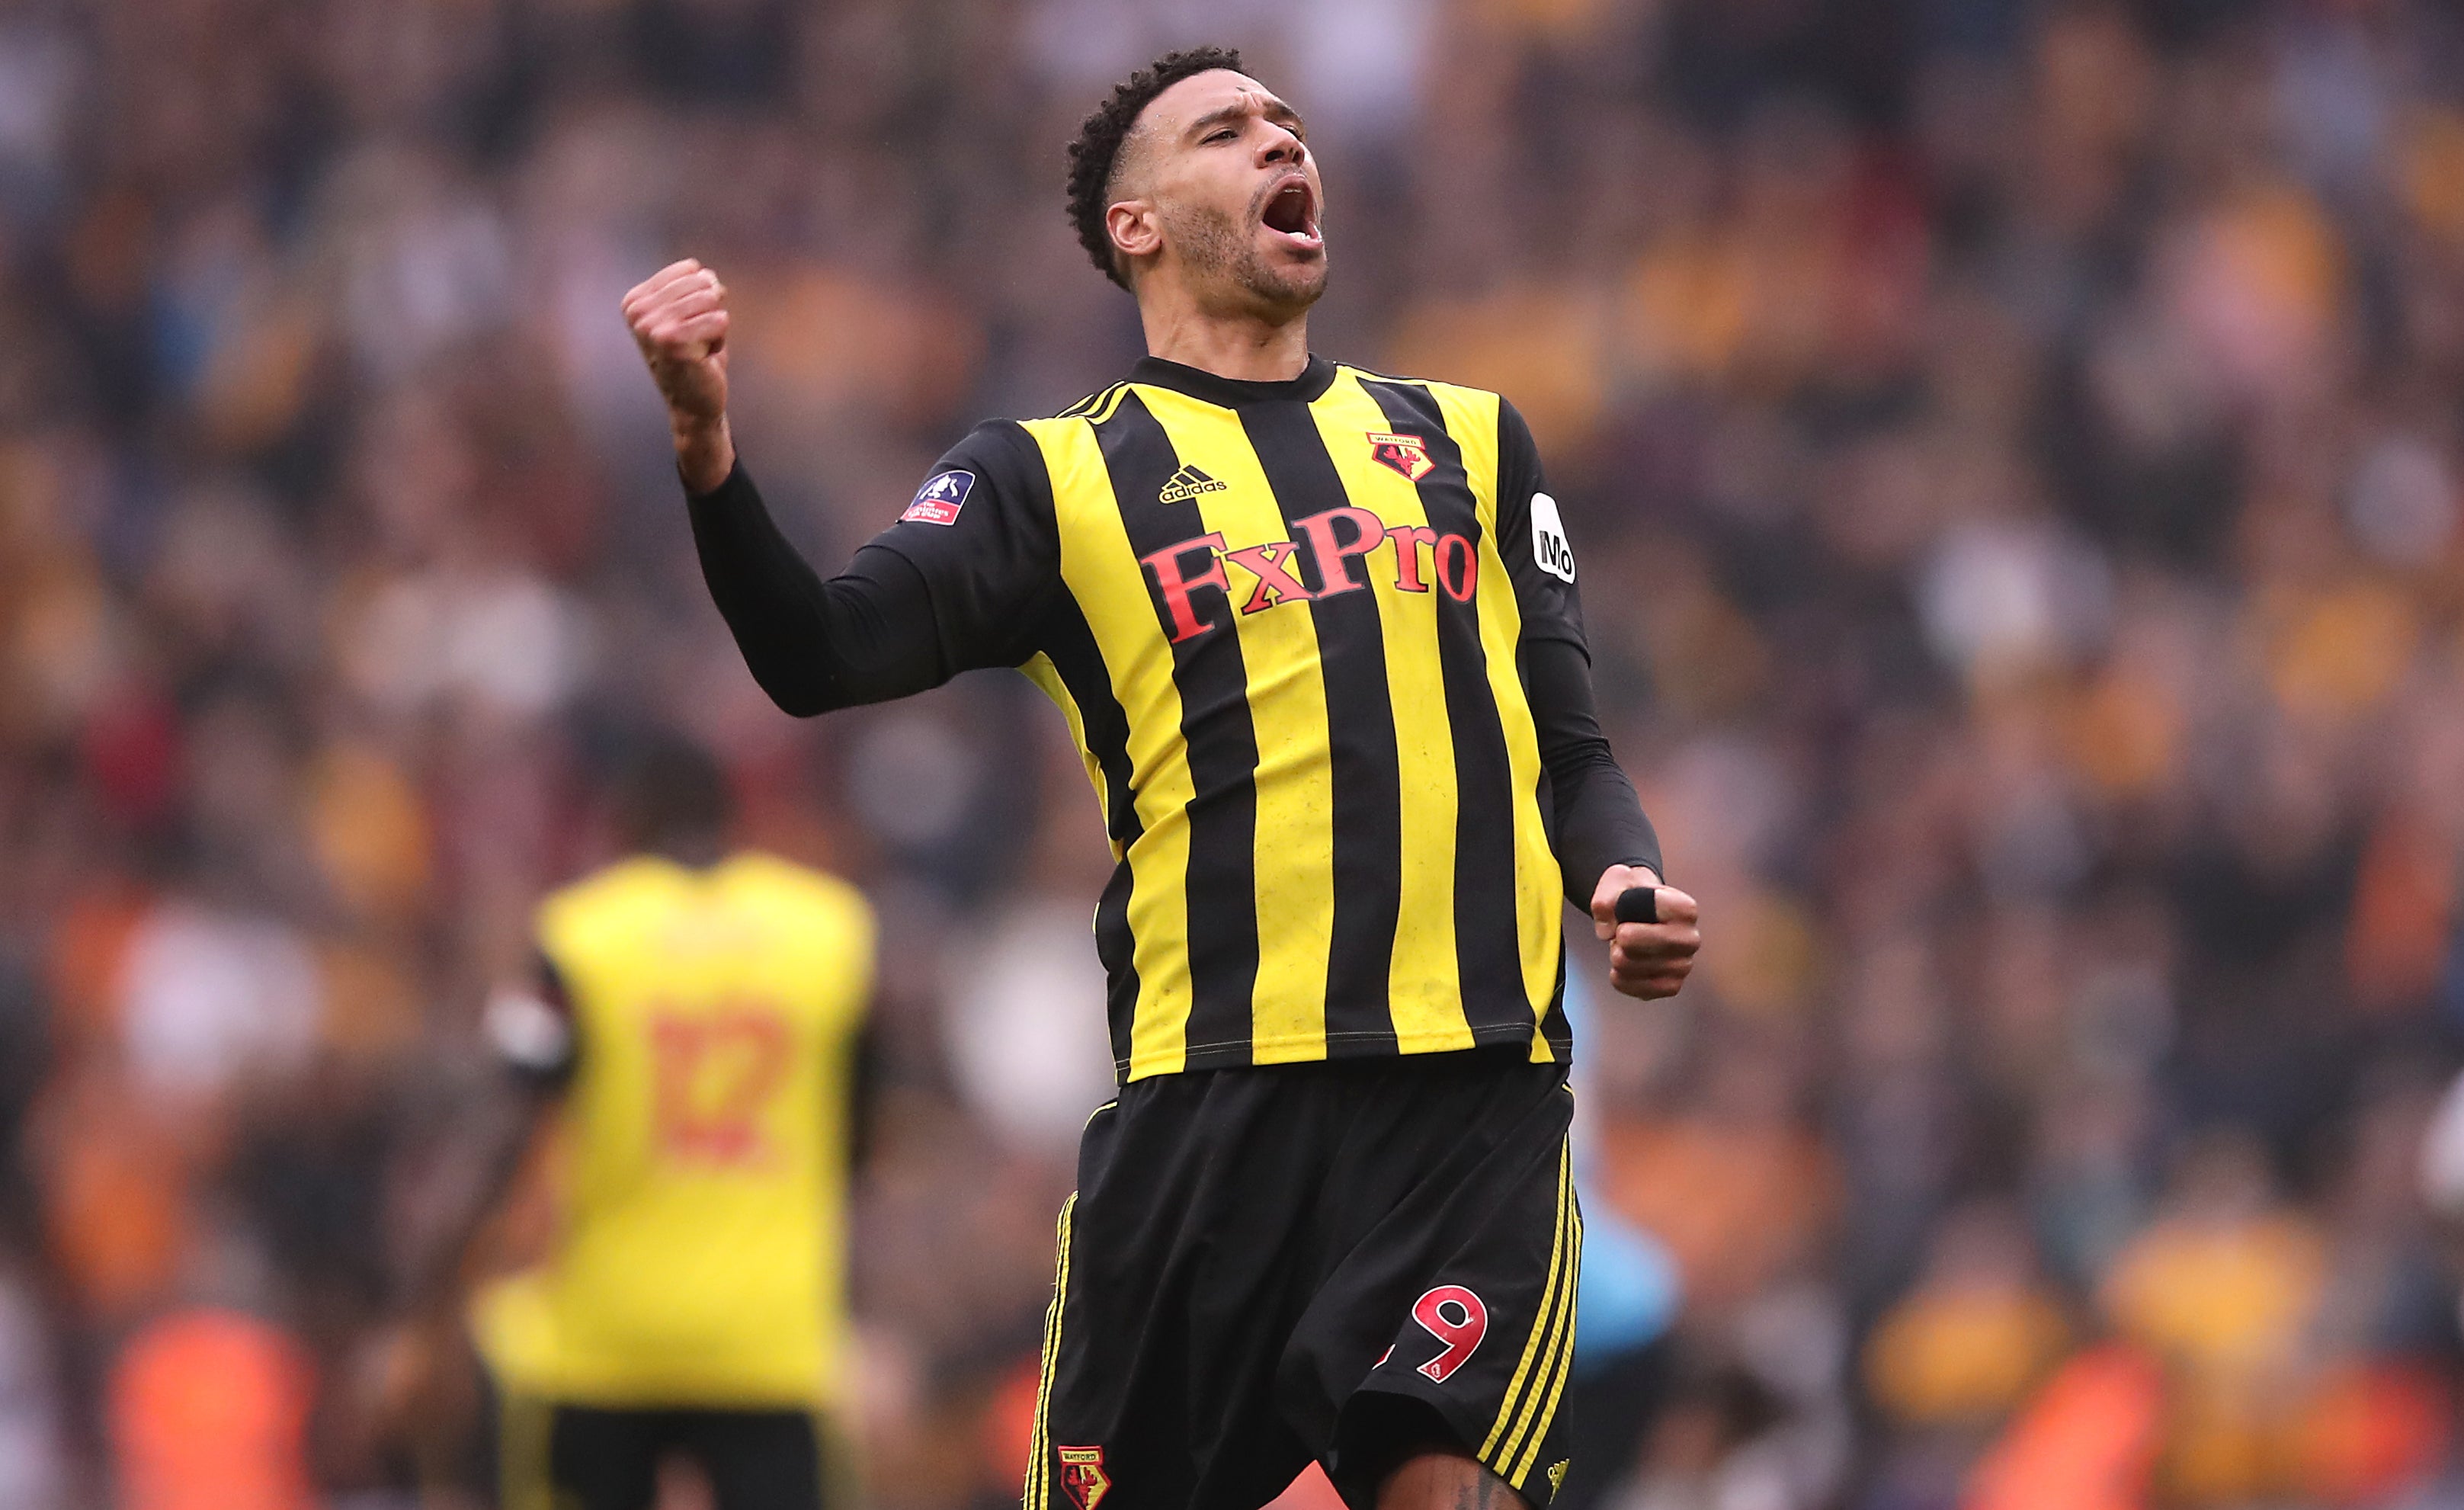 Capoue went on to become a key player for Watford (John Walton/PA)